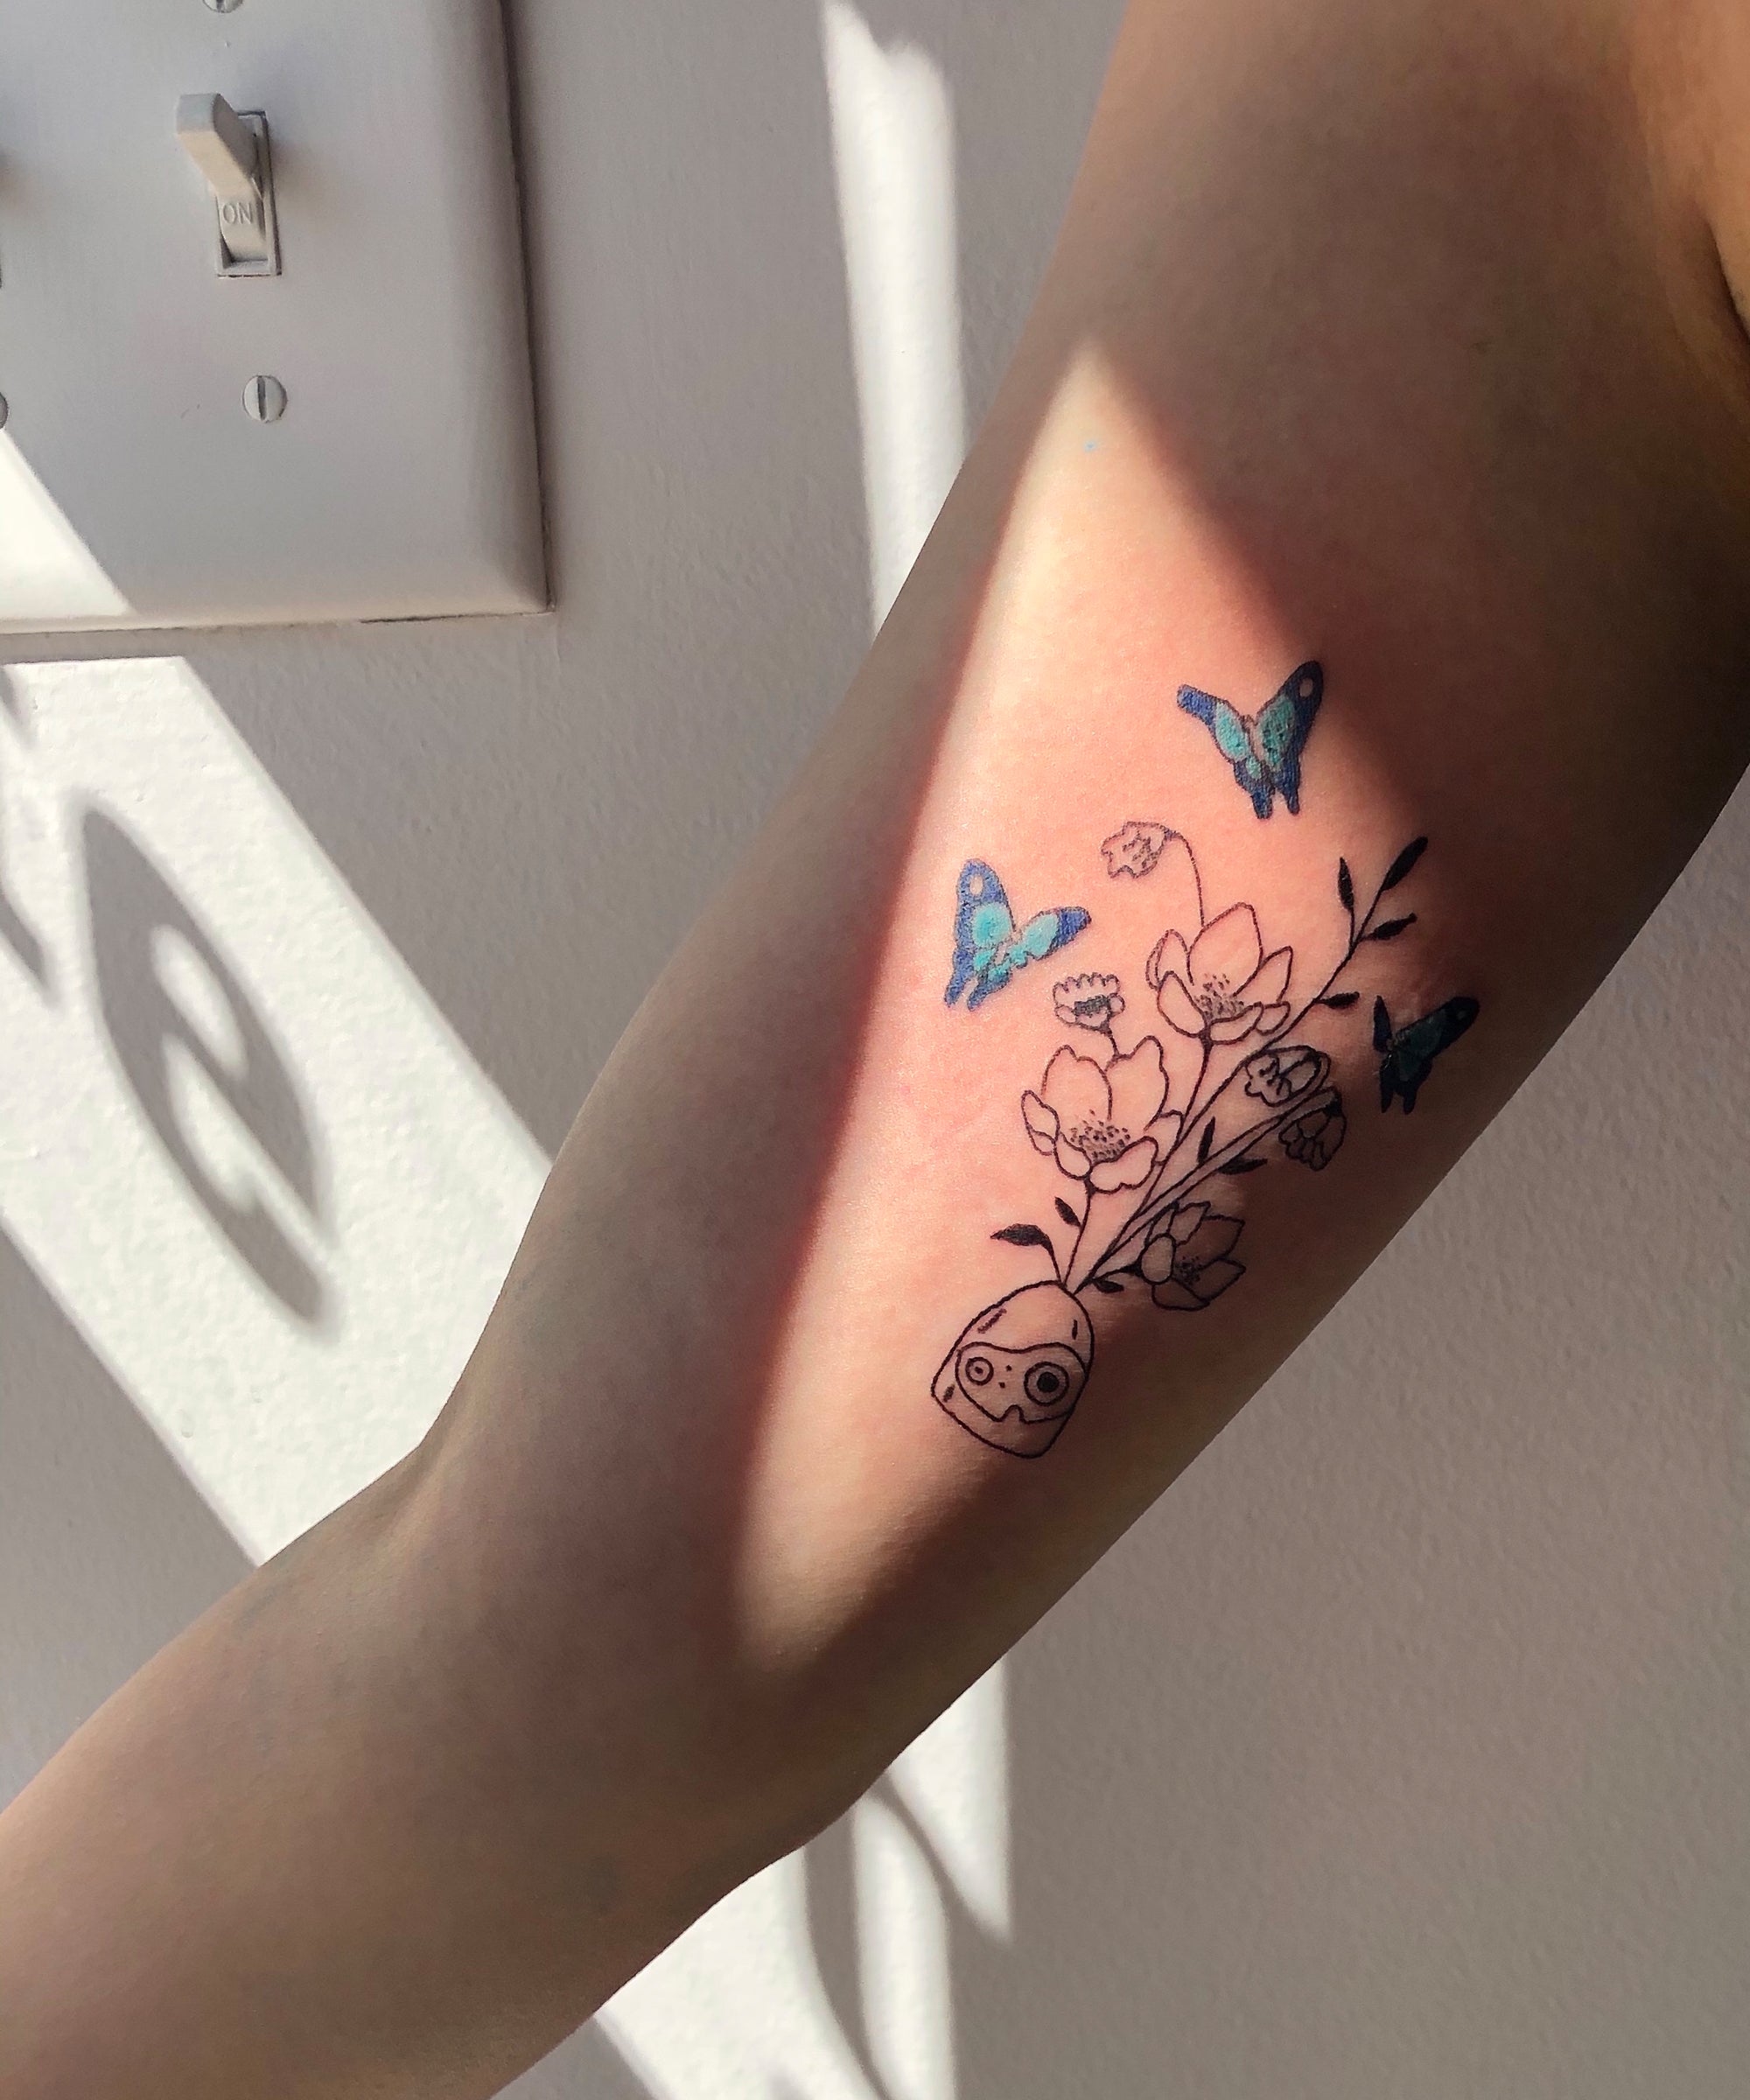 Can Anxiety Tattoos Have a Relaxing Effect